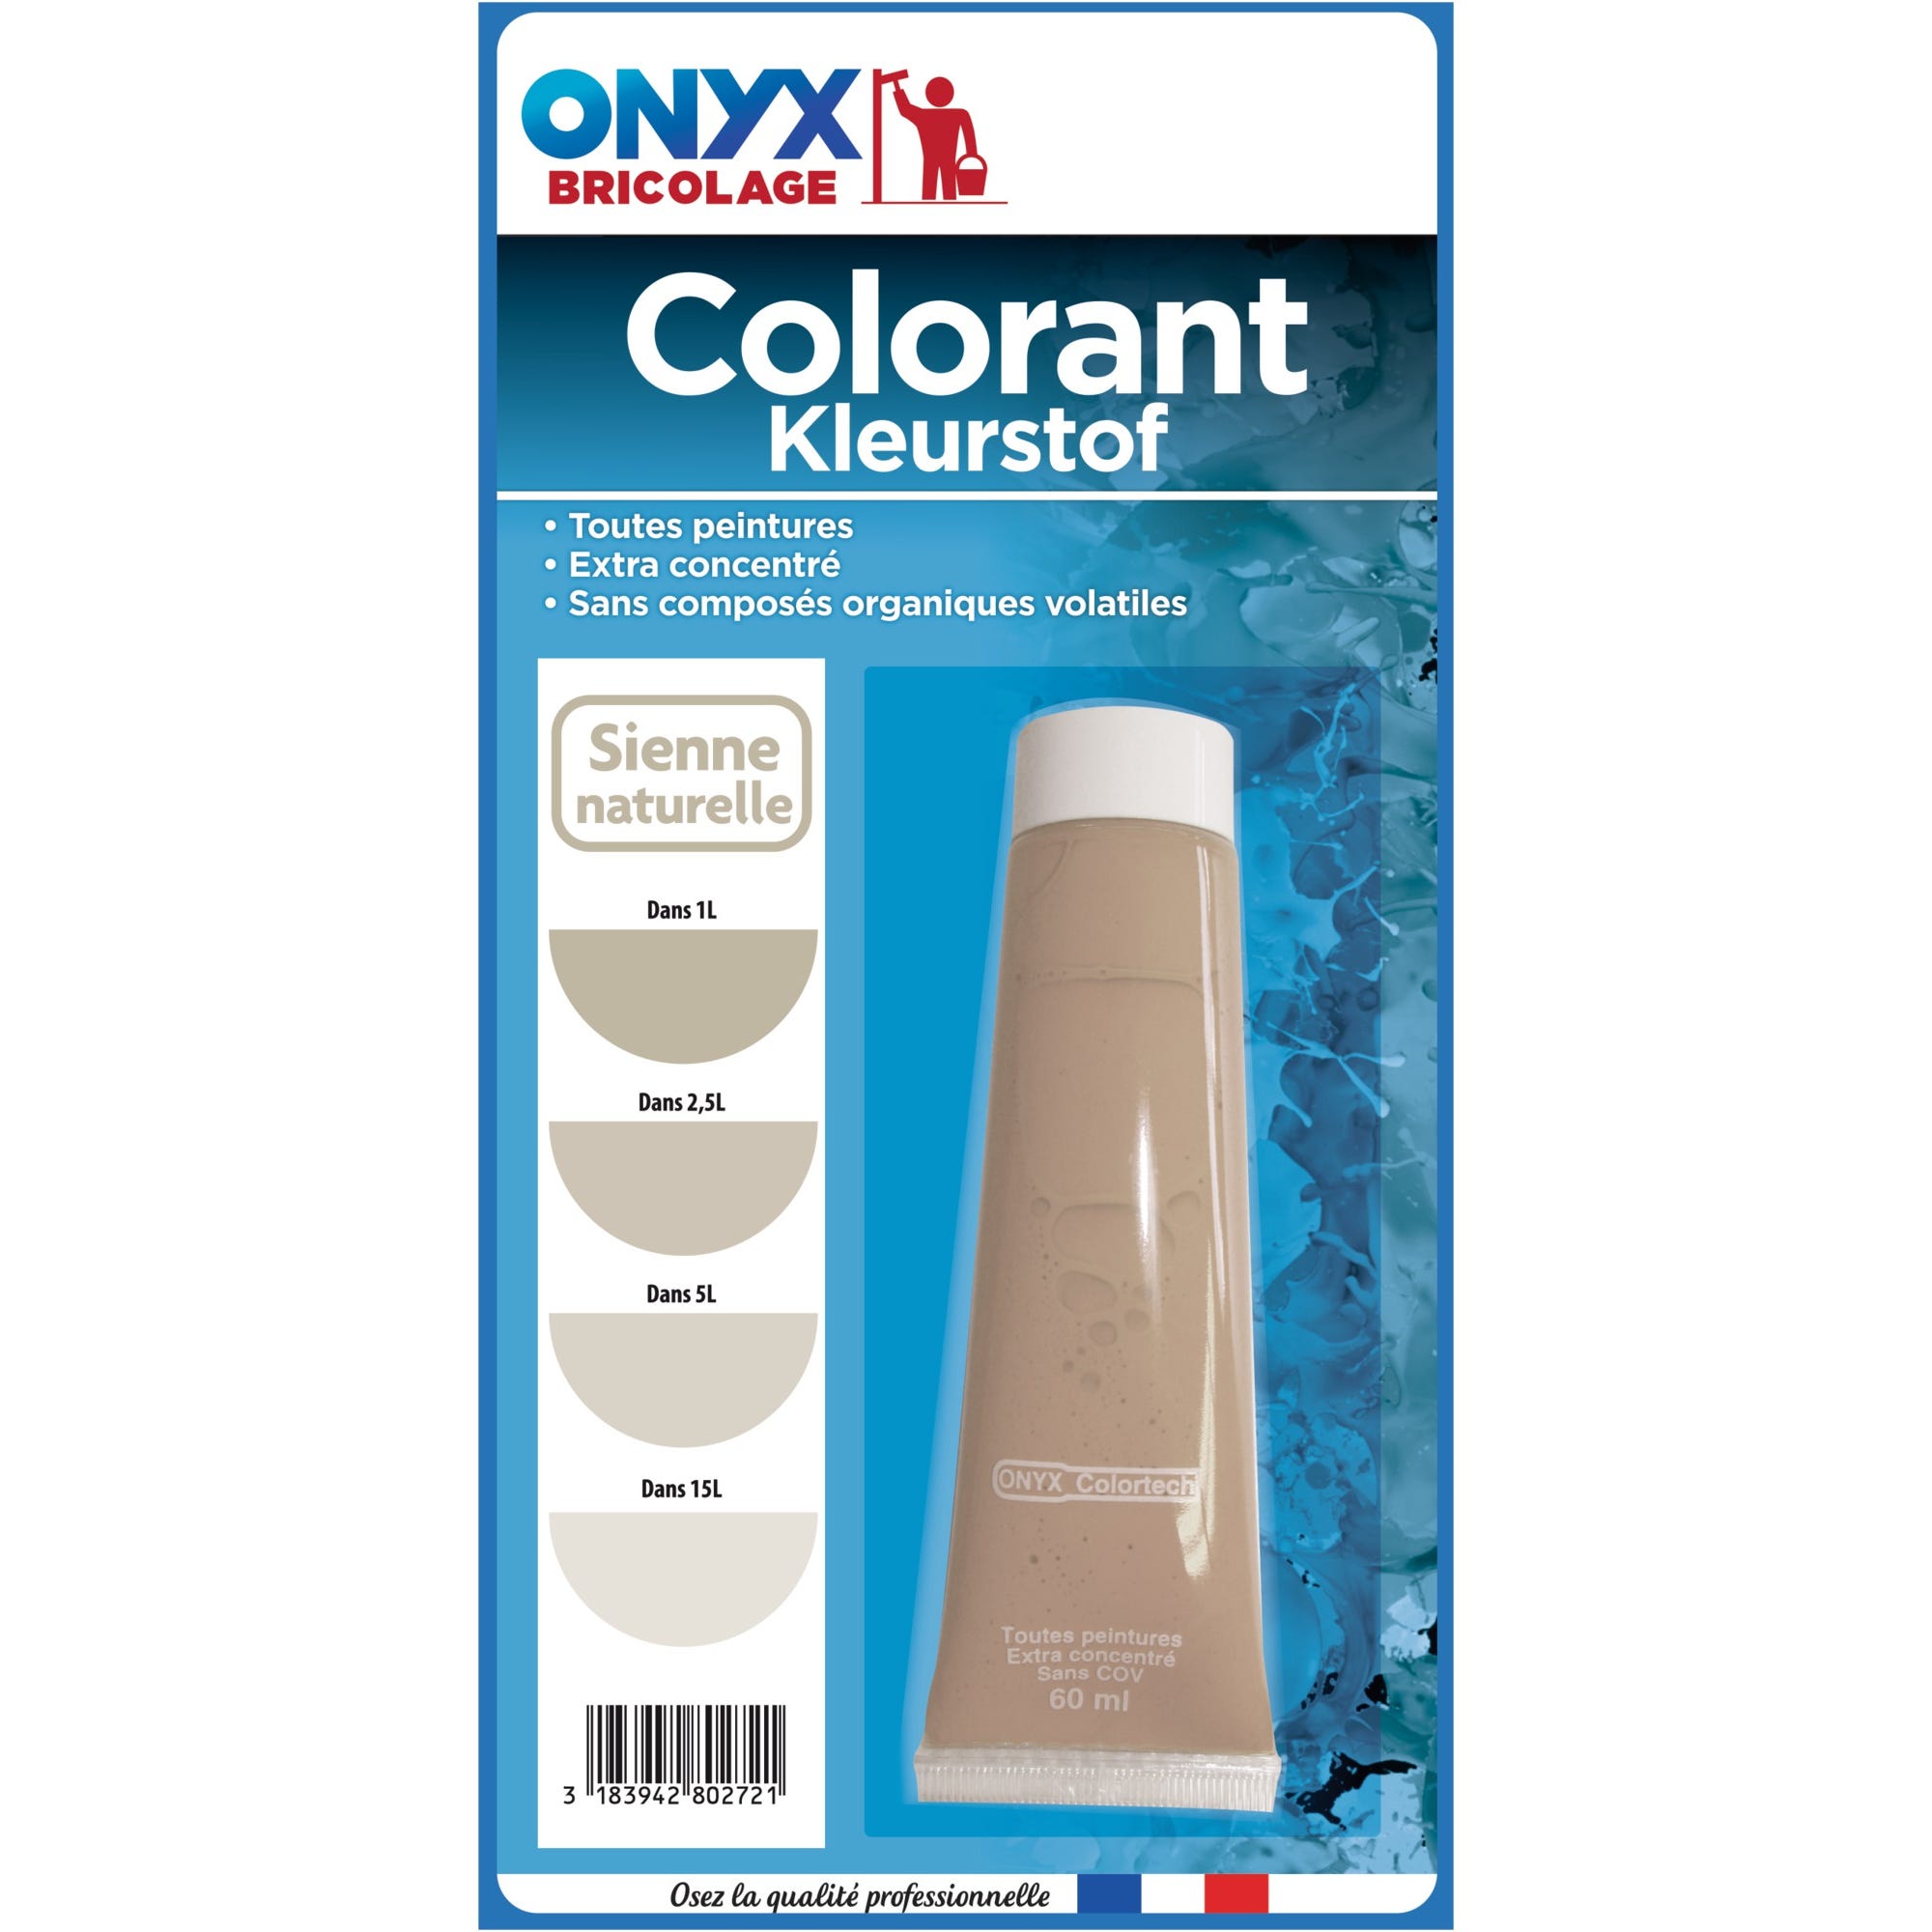 Colorant universel 60 ml Onyx - Sienne naturelle 0